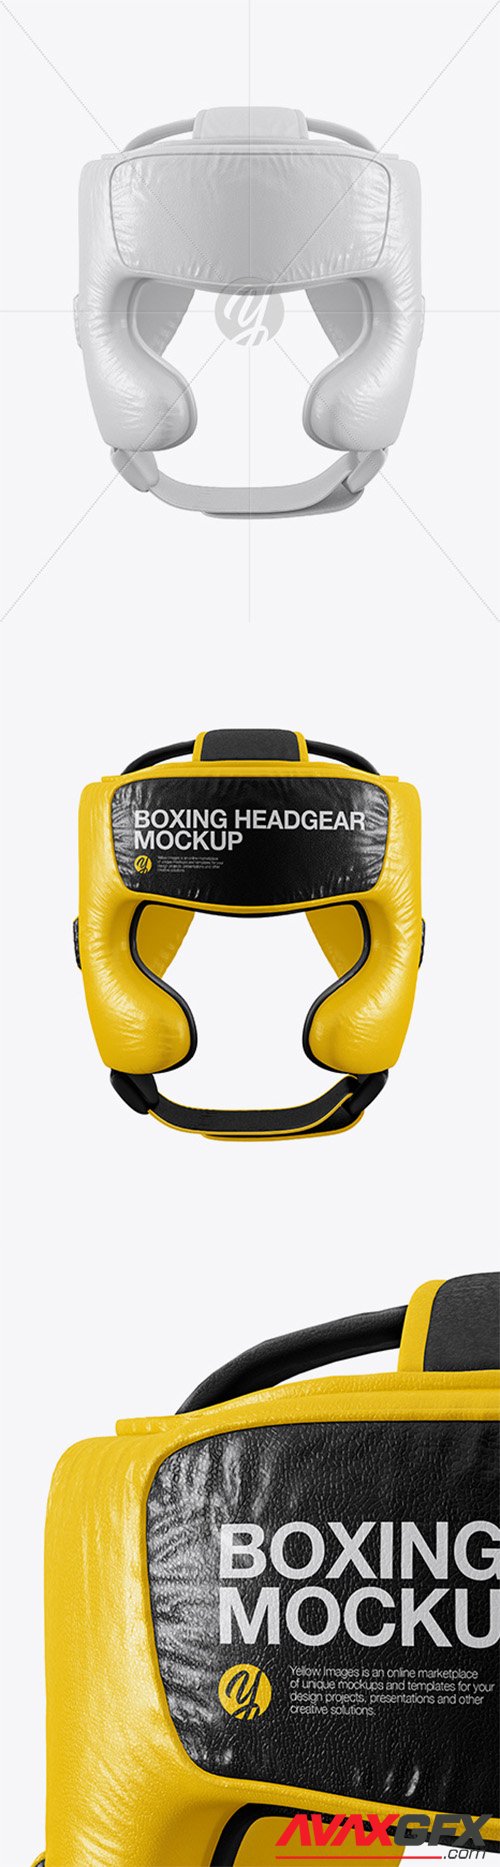 Boxing Headgear Mockup - Front View 21687